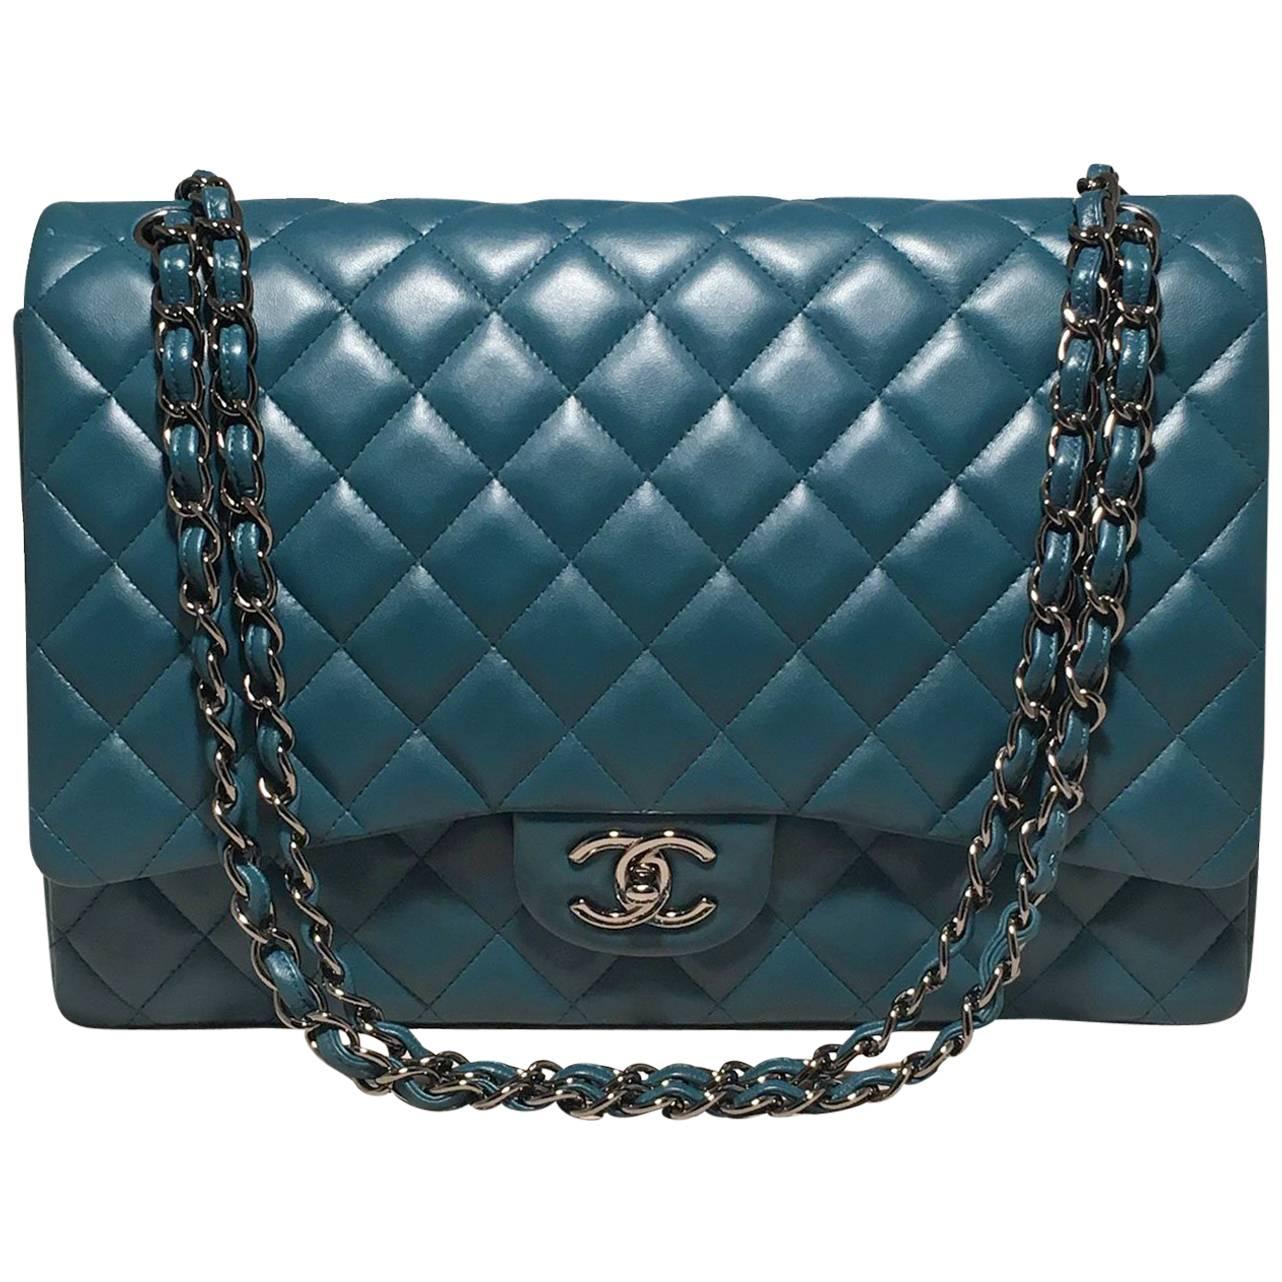 Chanel Dark Teal Quilted Leather 2.55 Maxi Double Flap Classic Shoulder Bag